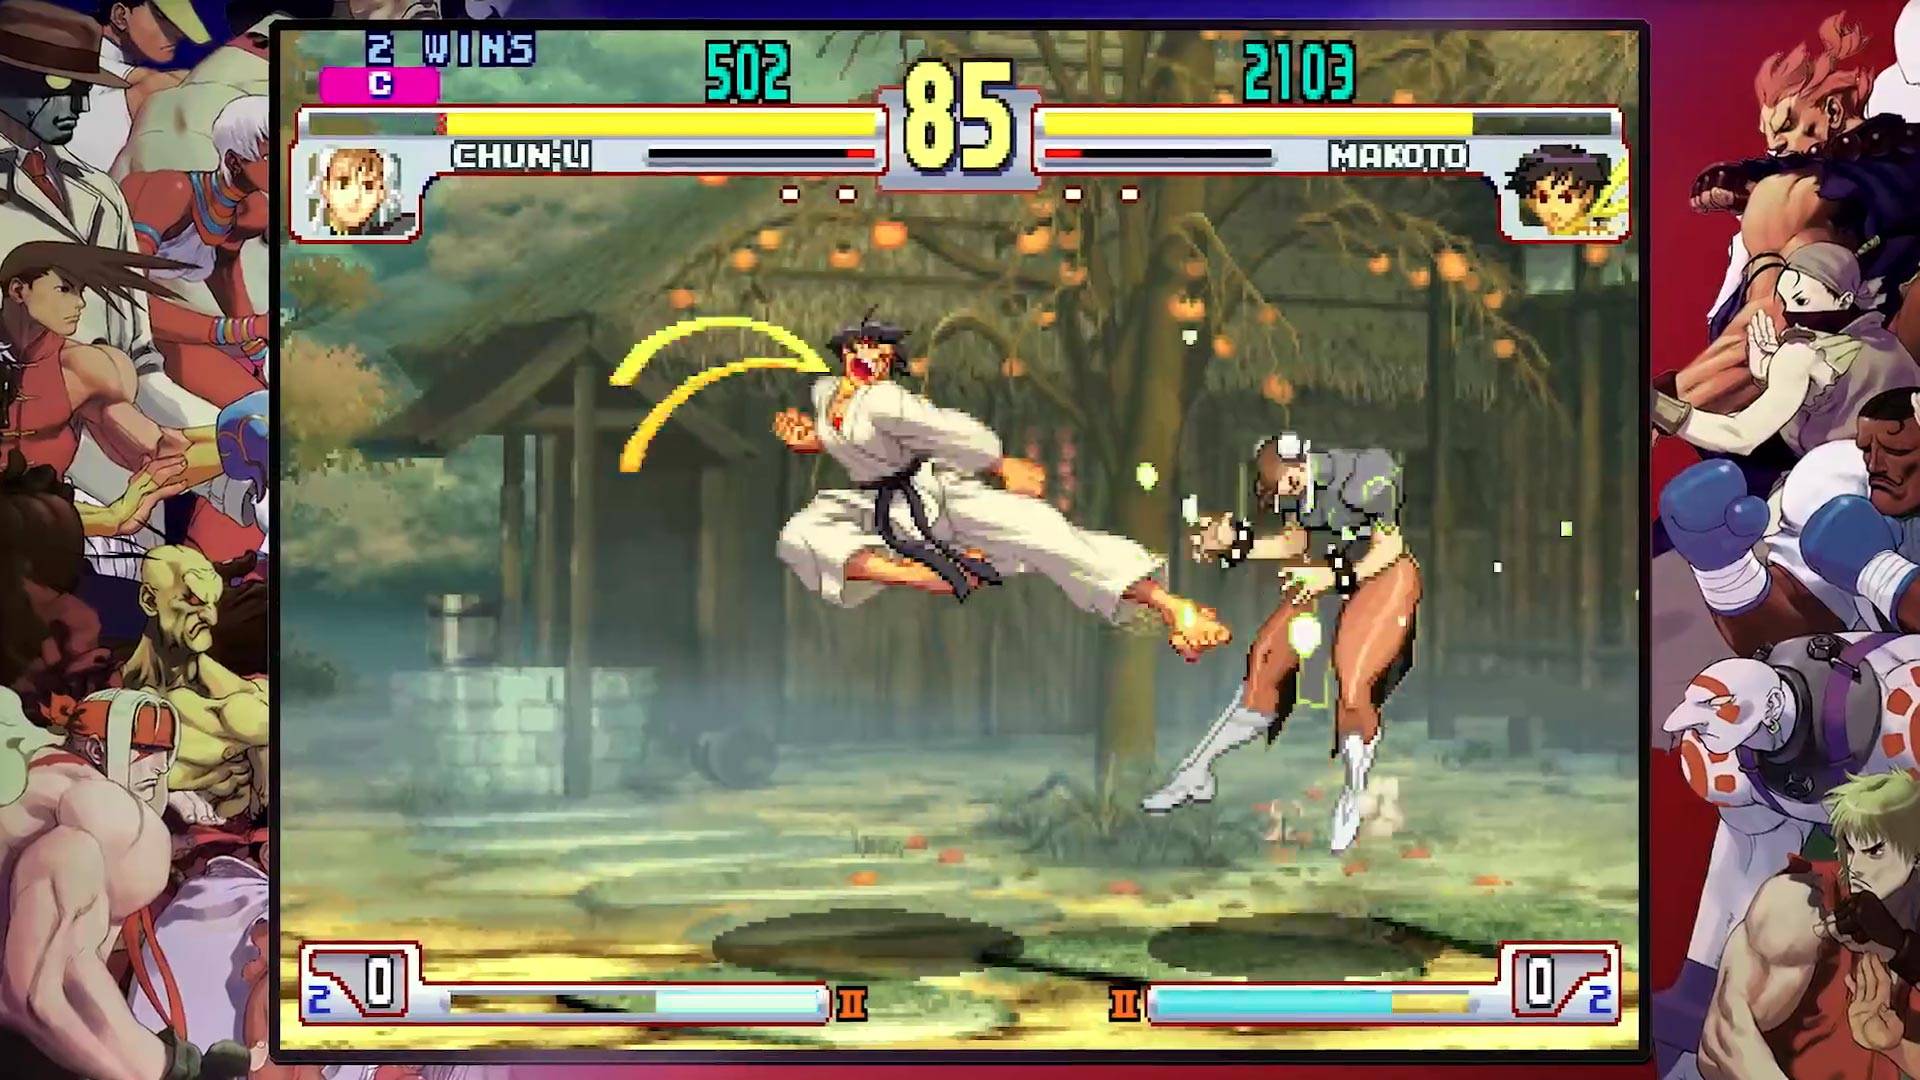 Two characters from Street Fighter, one of them Chun Li, are fighting in the air